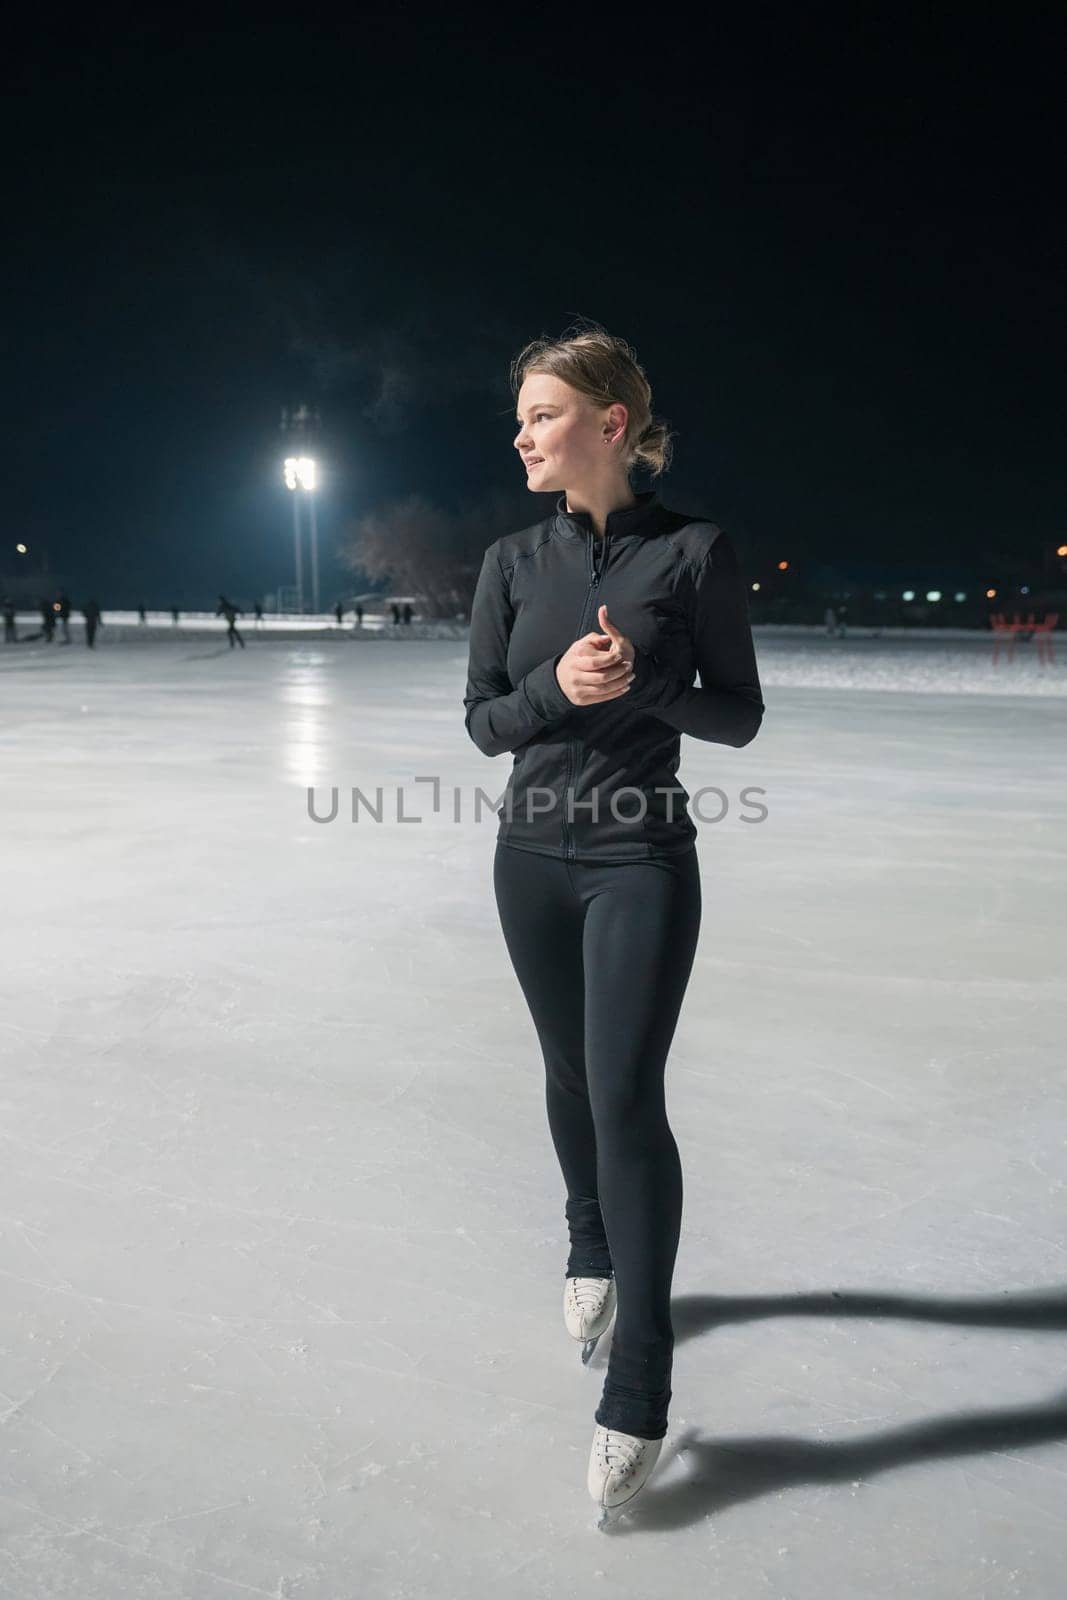 Beautiful young woman ice skating and performing she program over city outdoor ice arena. Winter activities concept